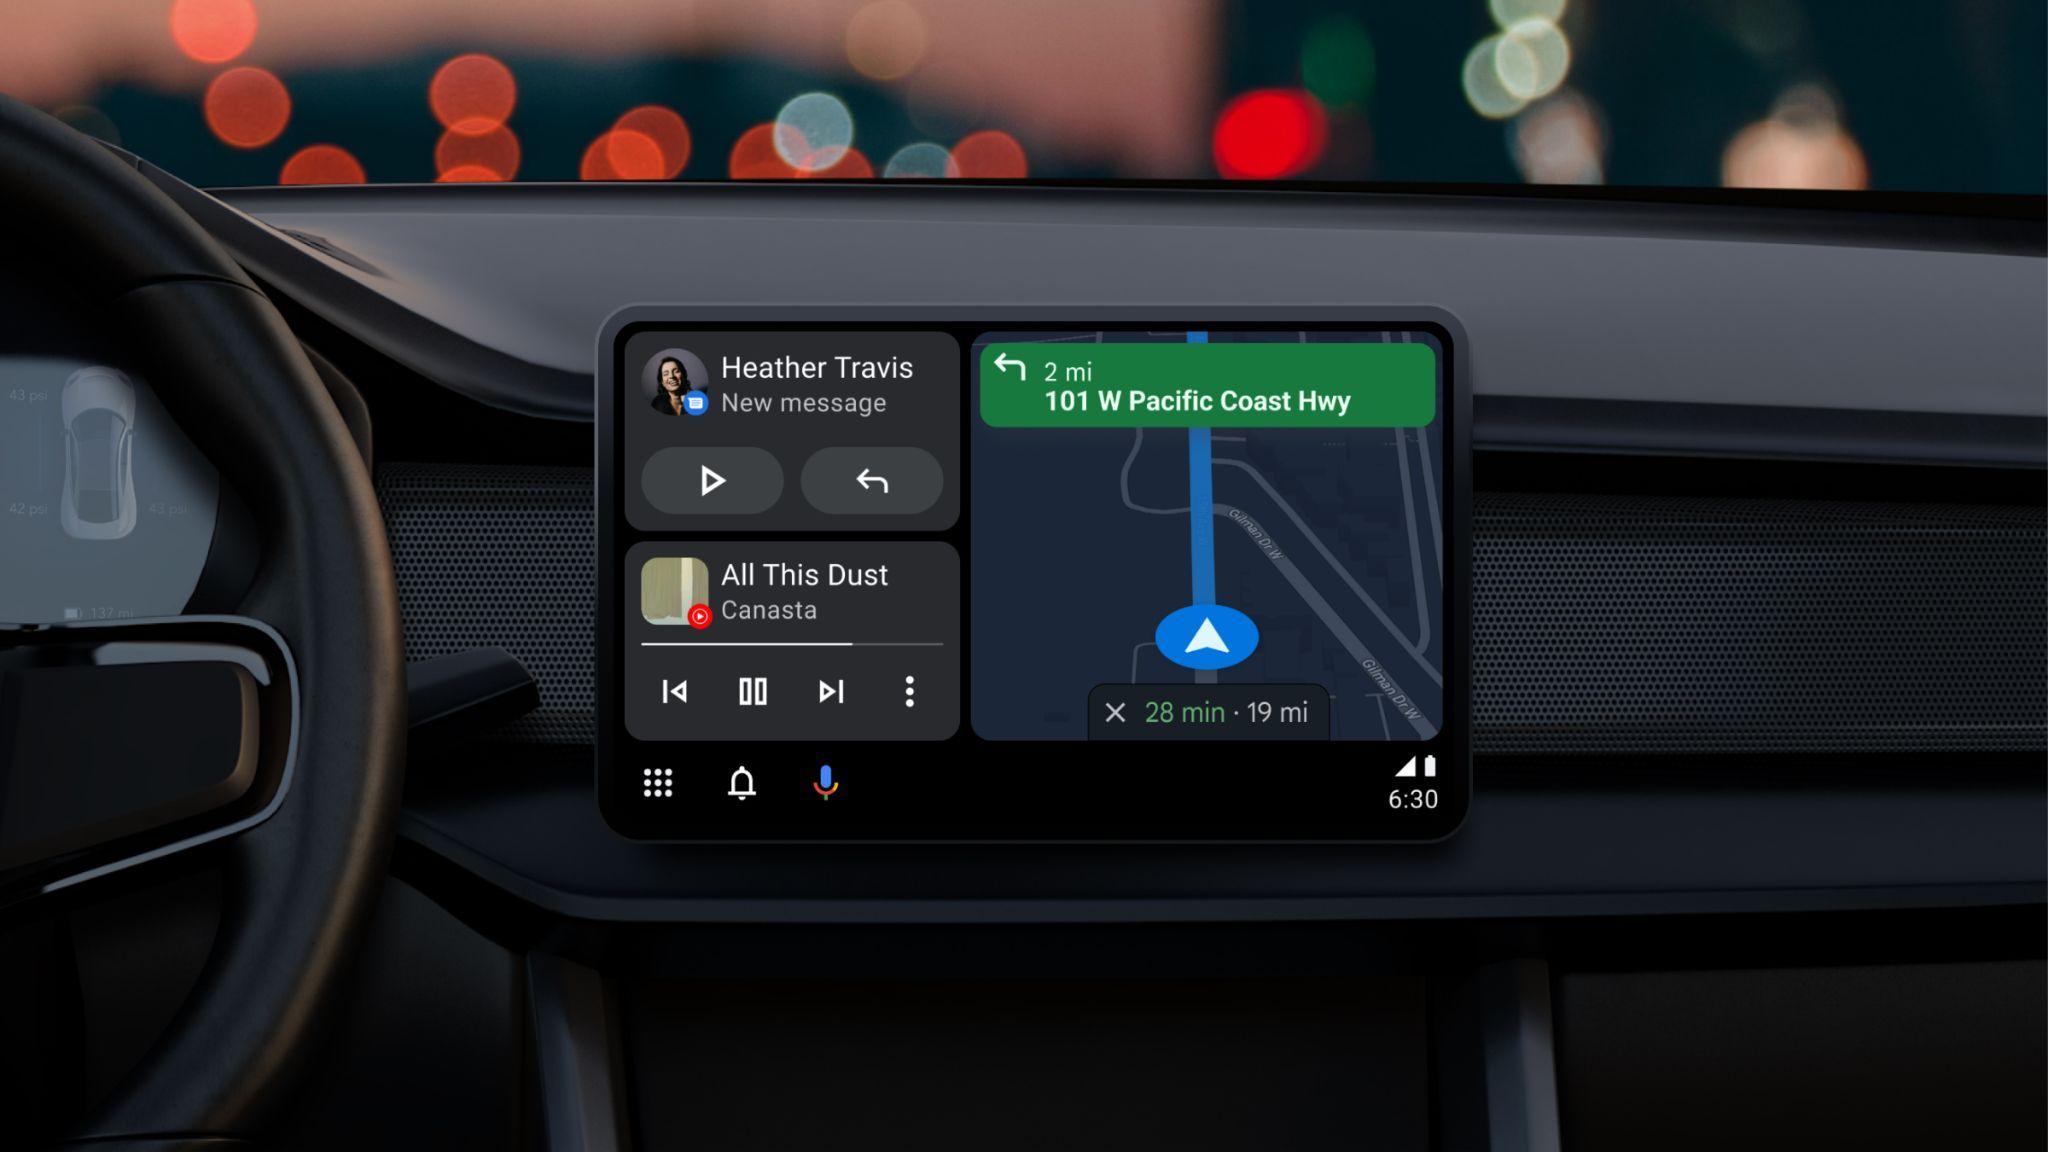 Android Auto vs. CarPlay: Which is better?